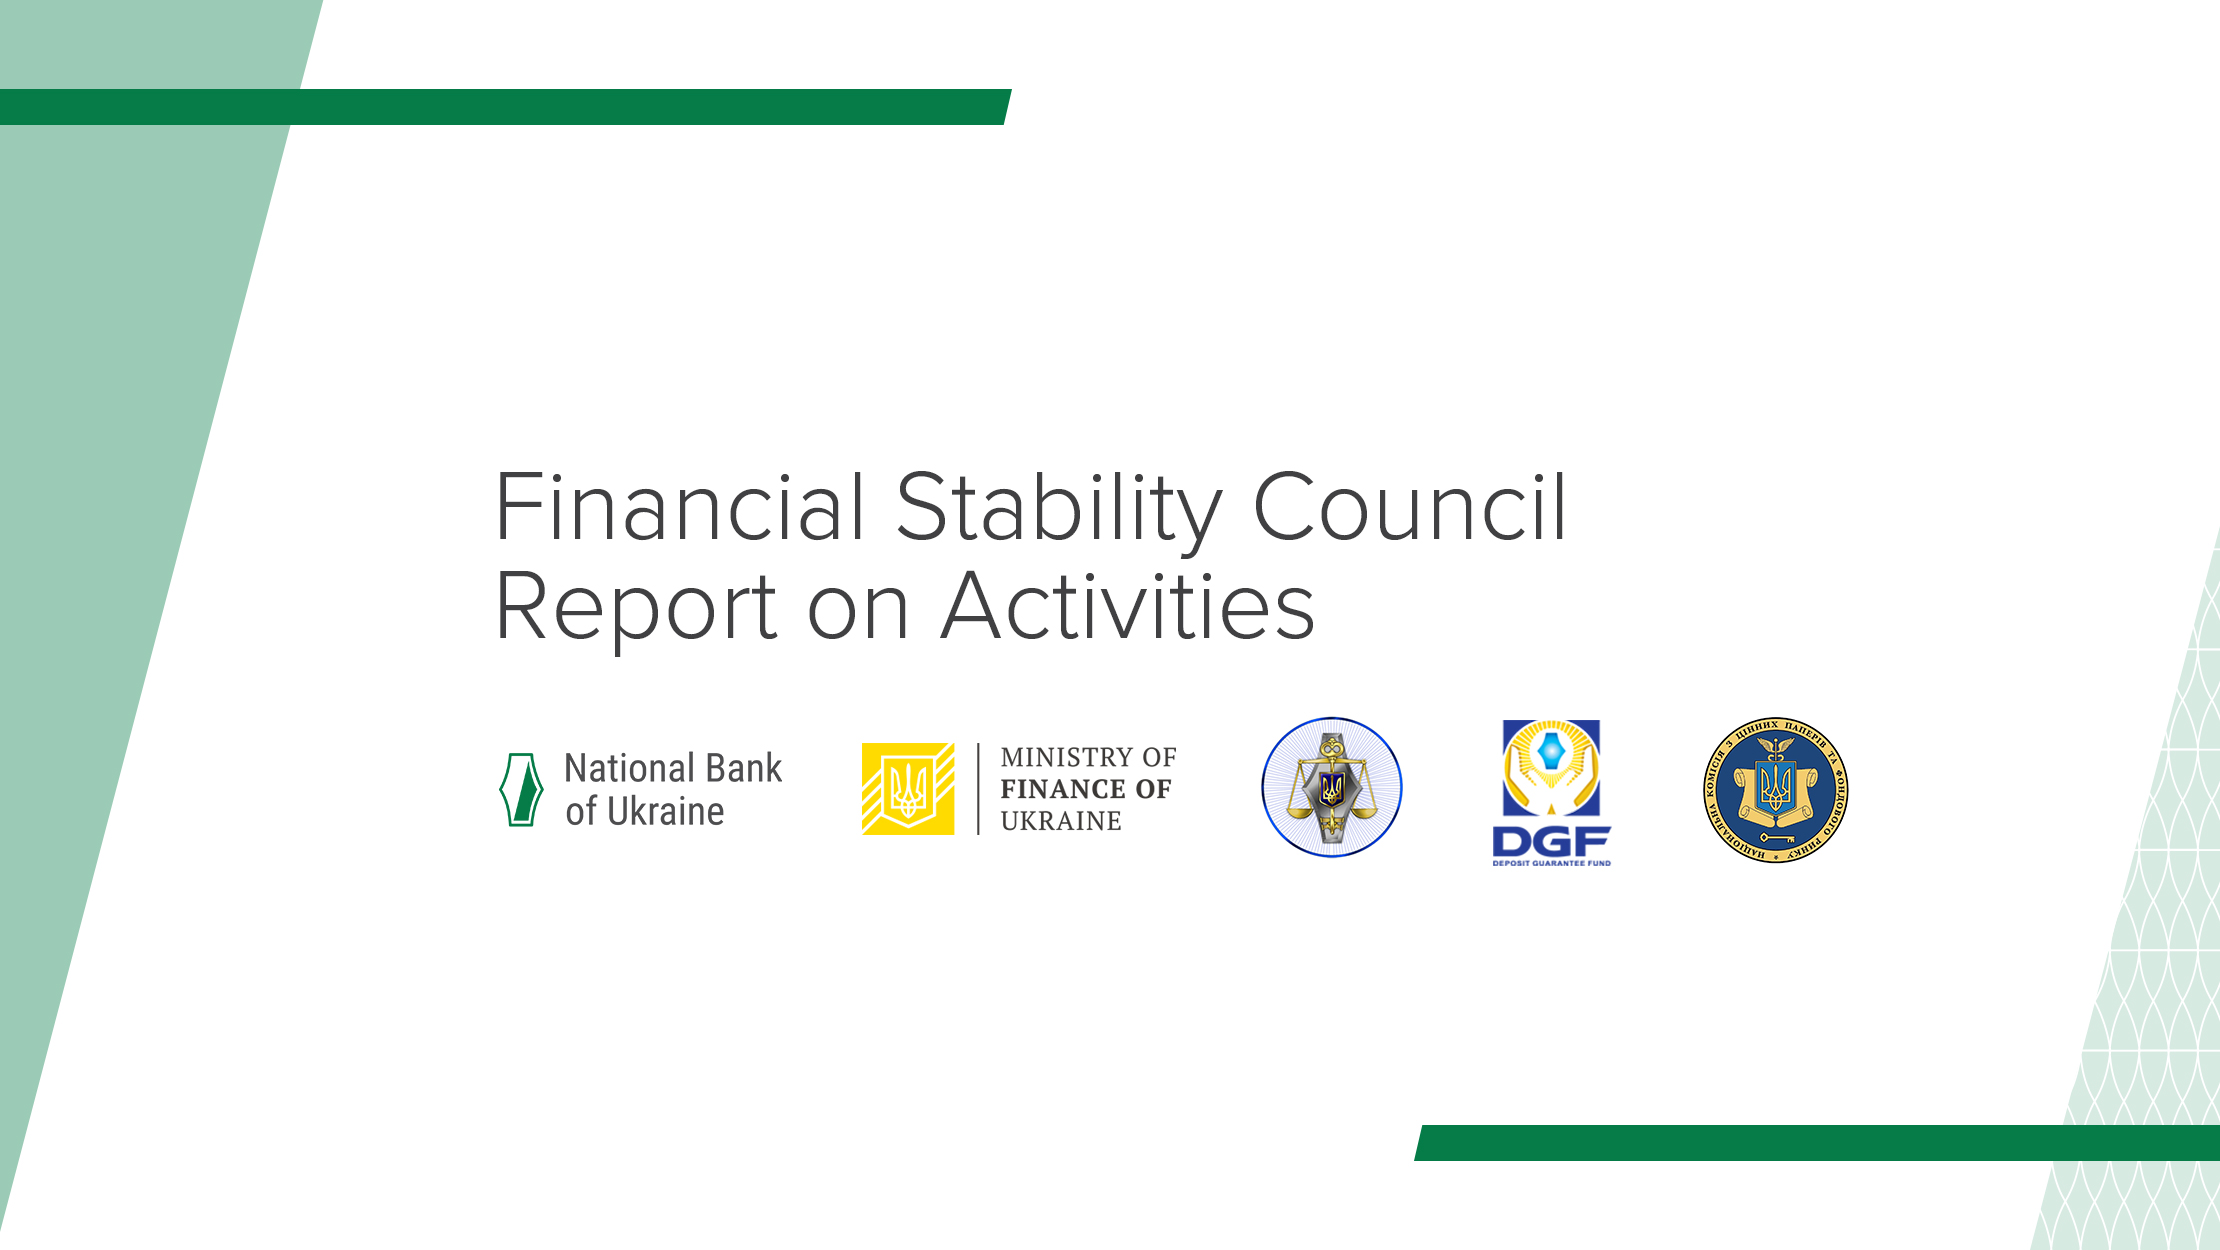 Financial Stability Council Report on Activities (August 2019 – July 2020)